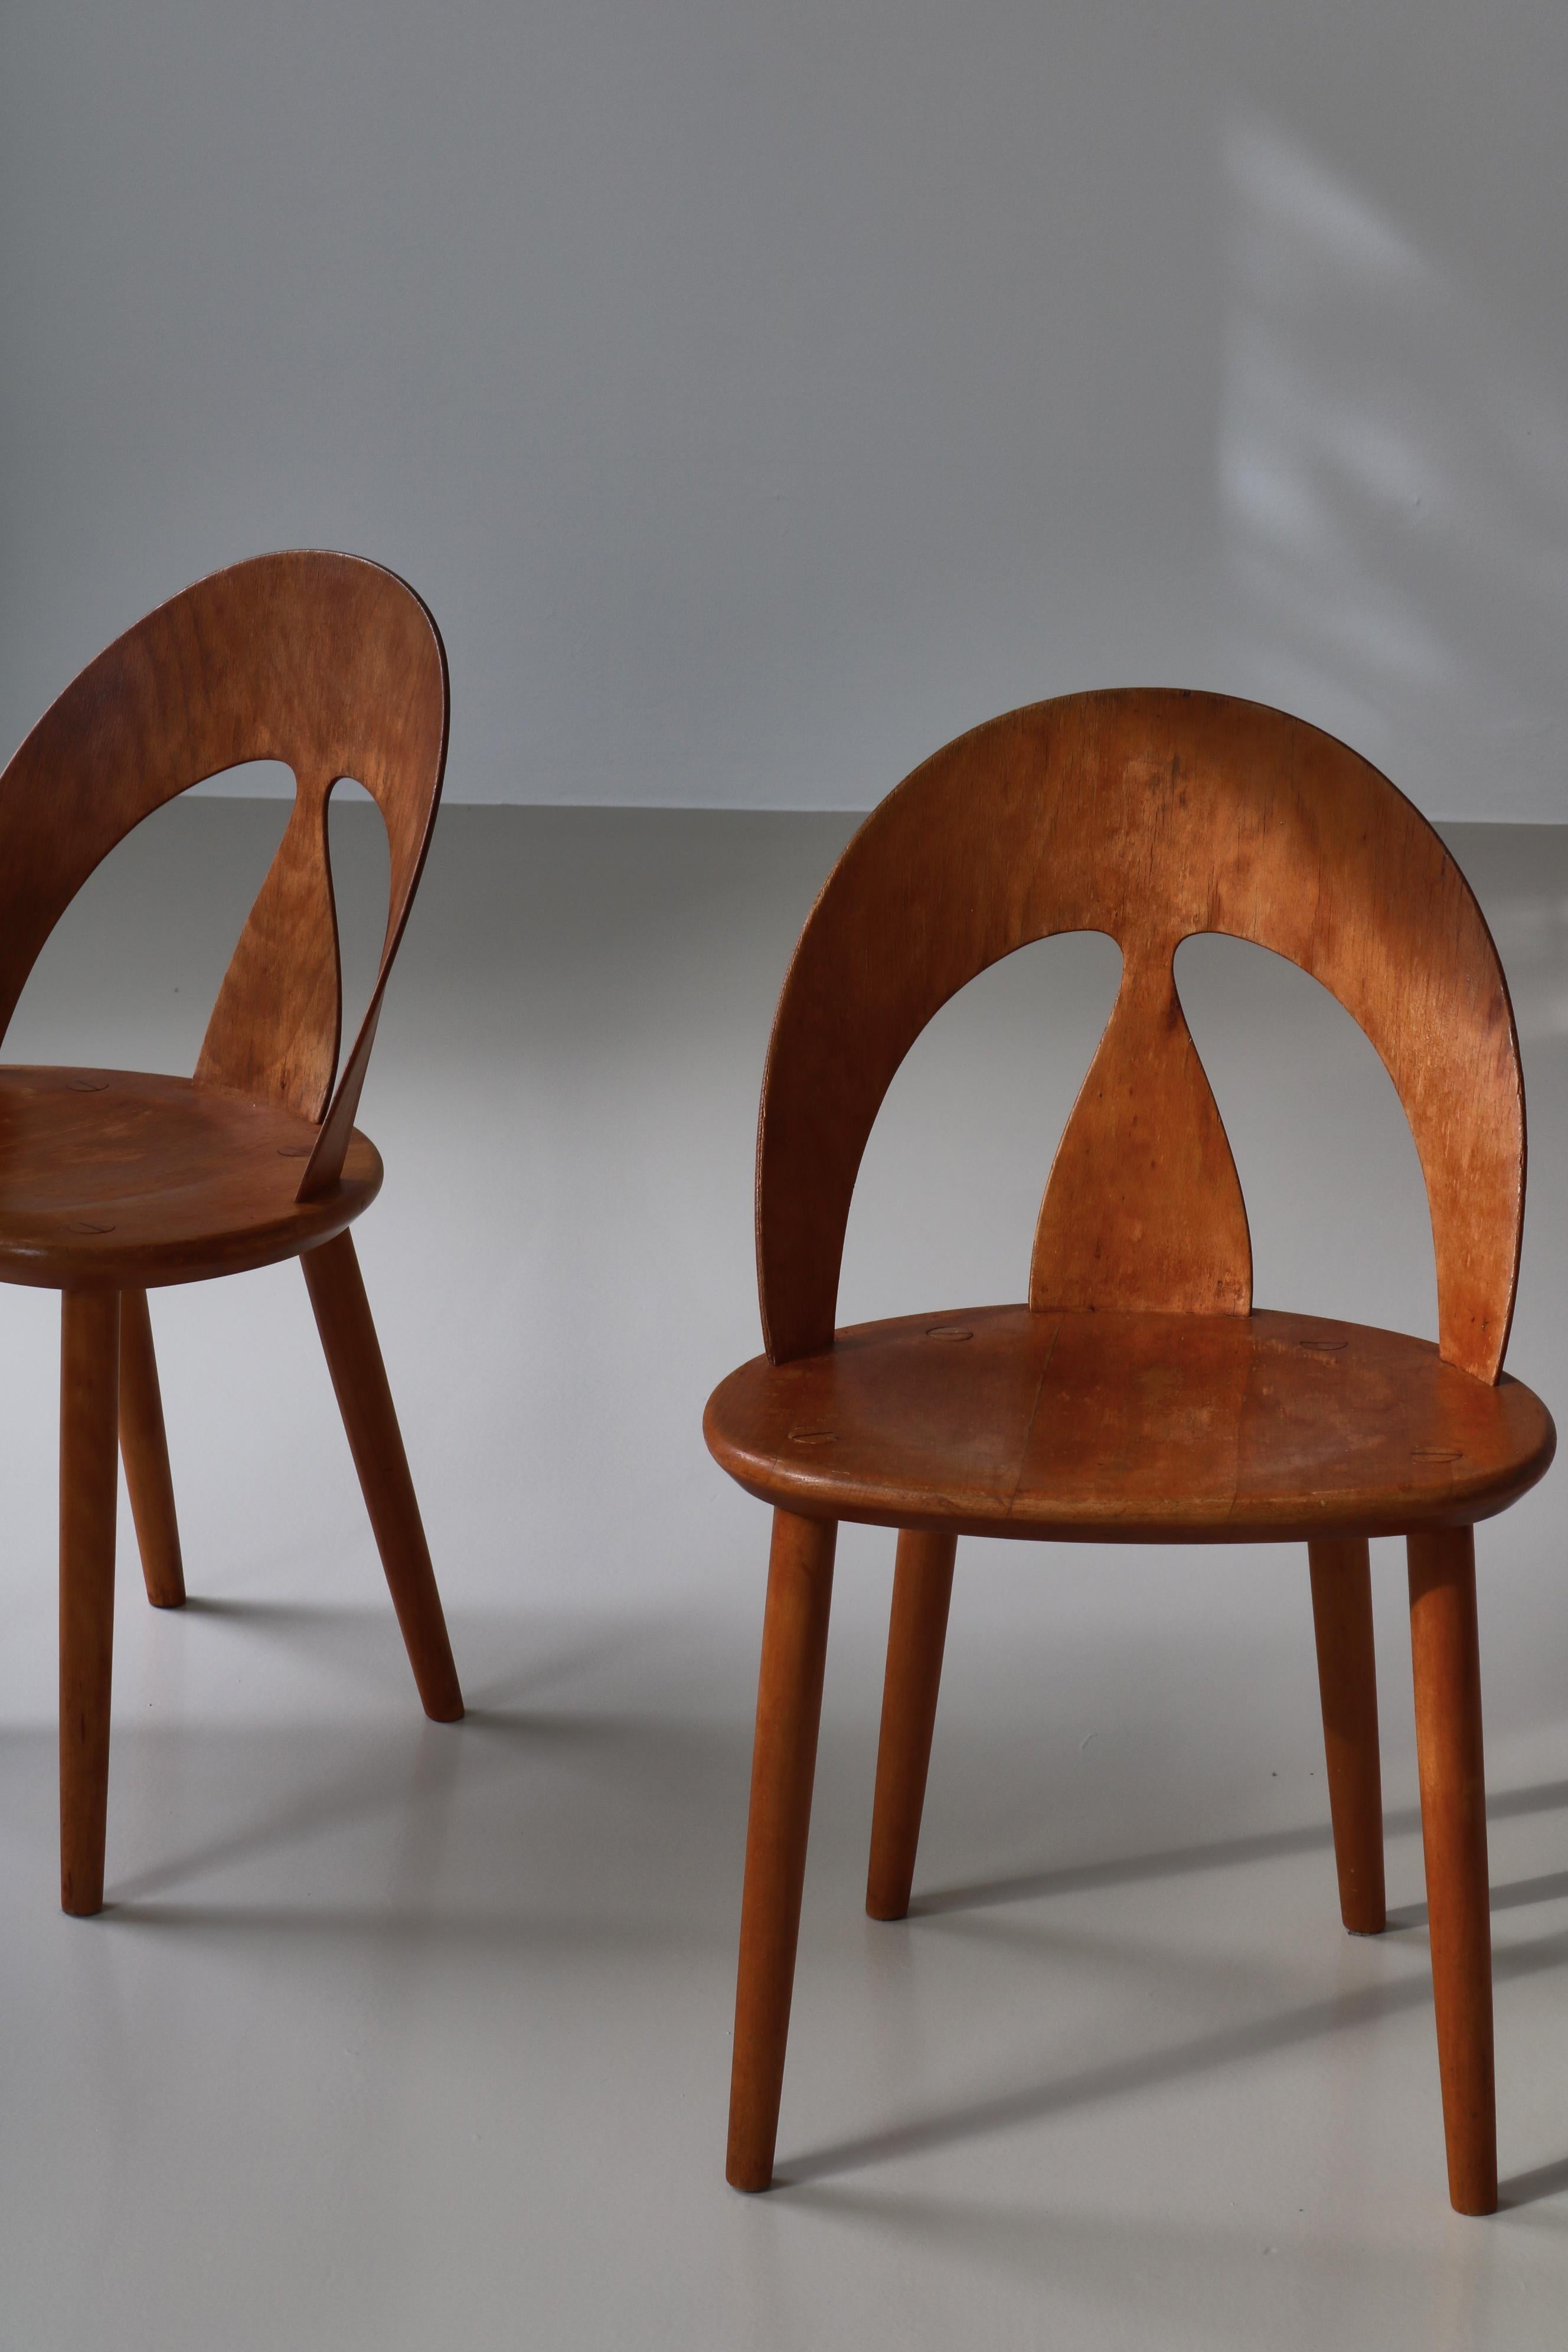 Børge Mogensen Early Edition Shell Chairs, Scandinavian Modern, 1950 In Fair Condition For Sale In Odense, DK